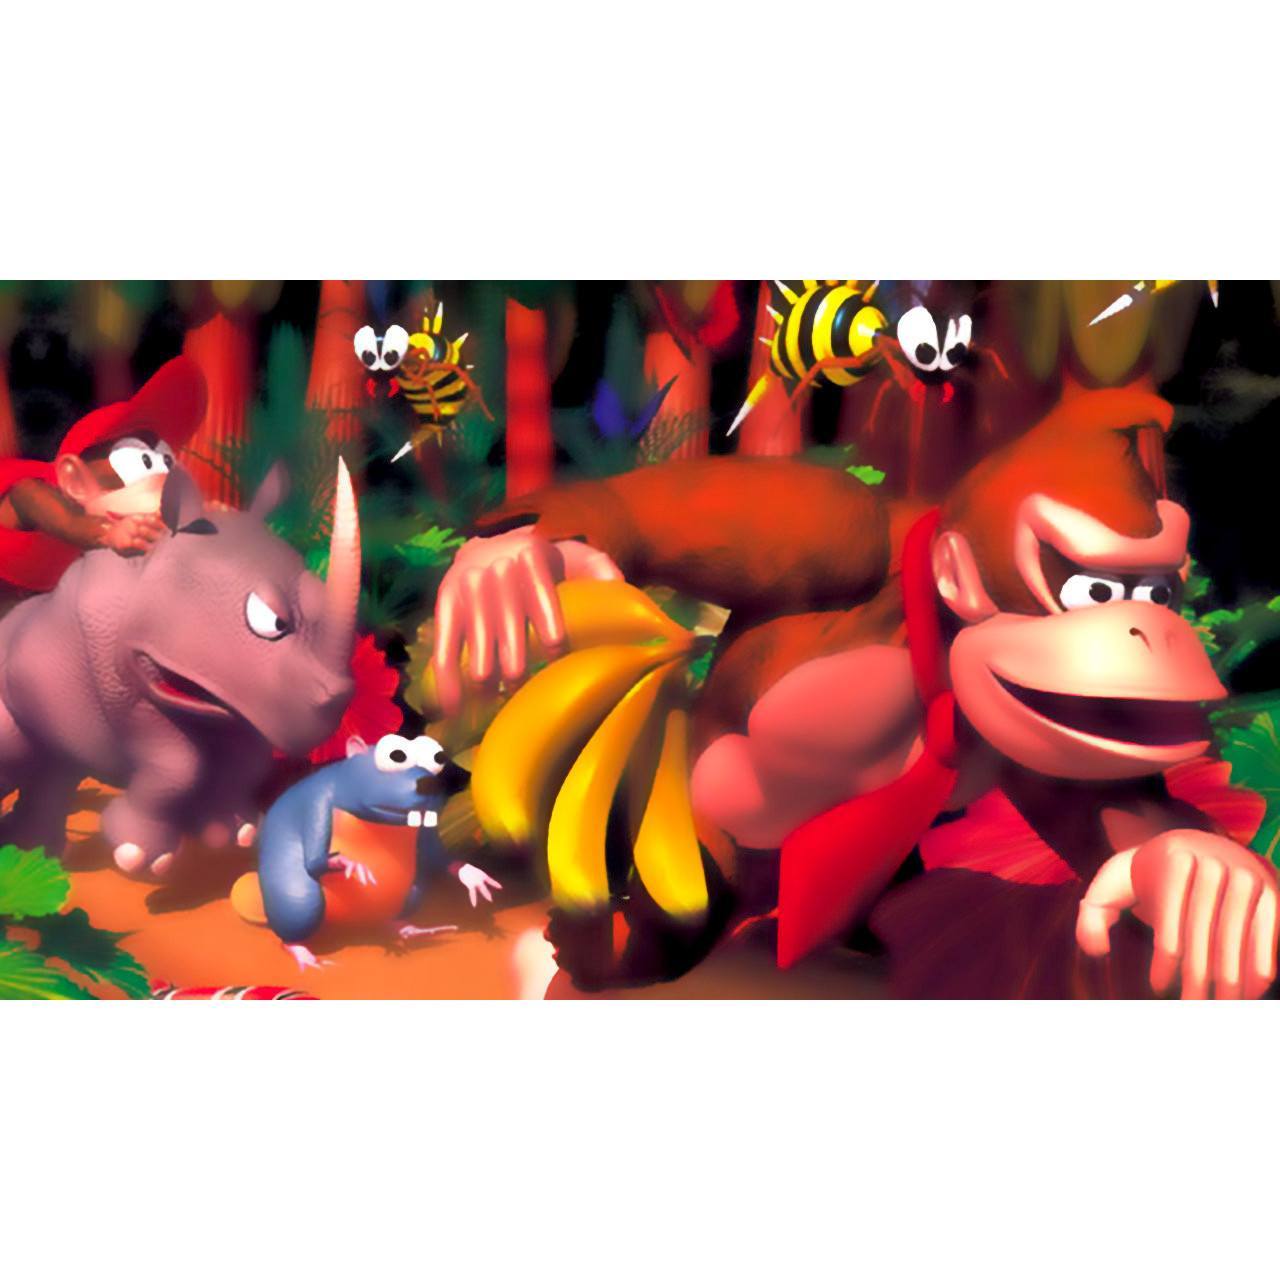 Donkey Kong Country SNES Super Nintendo Game